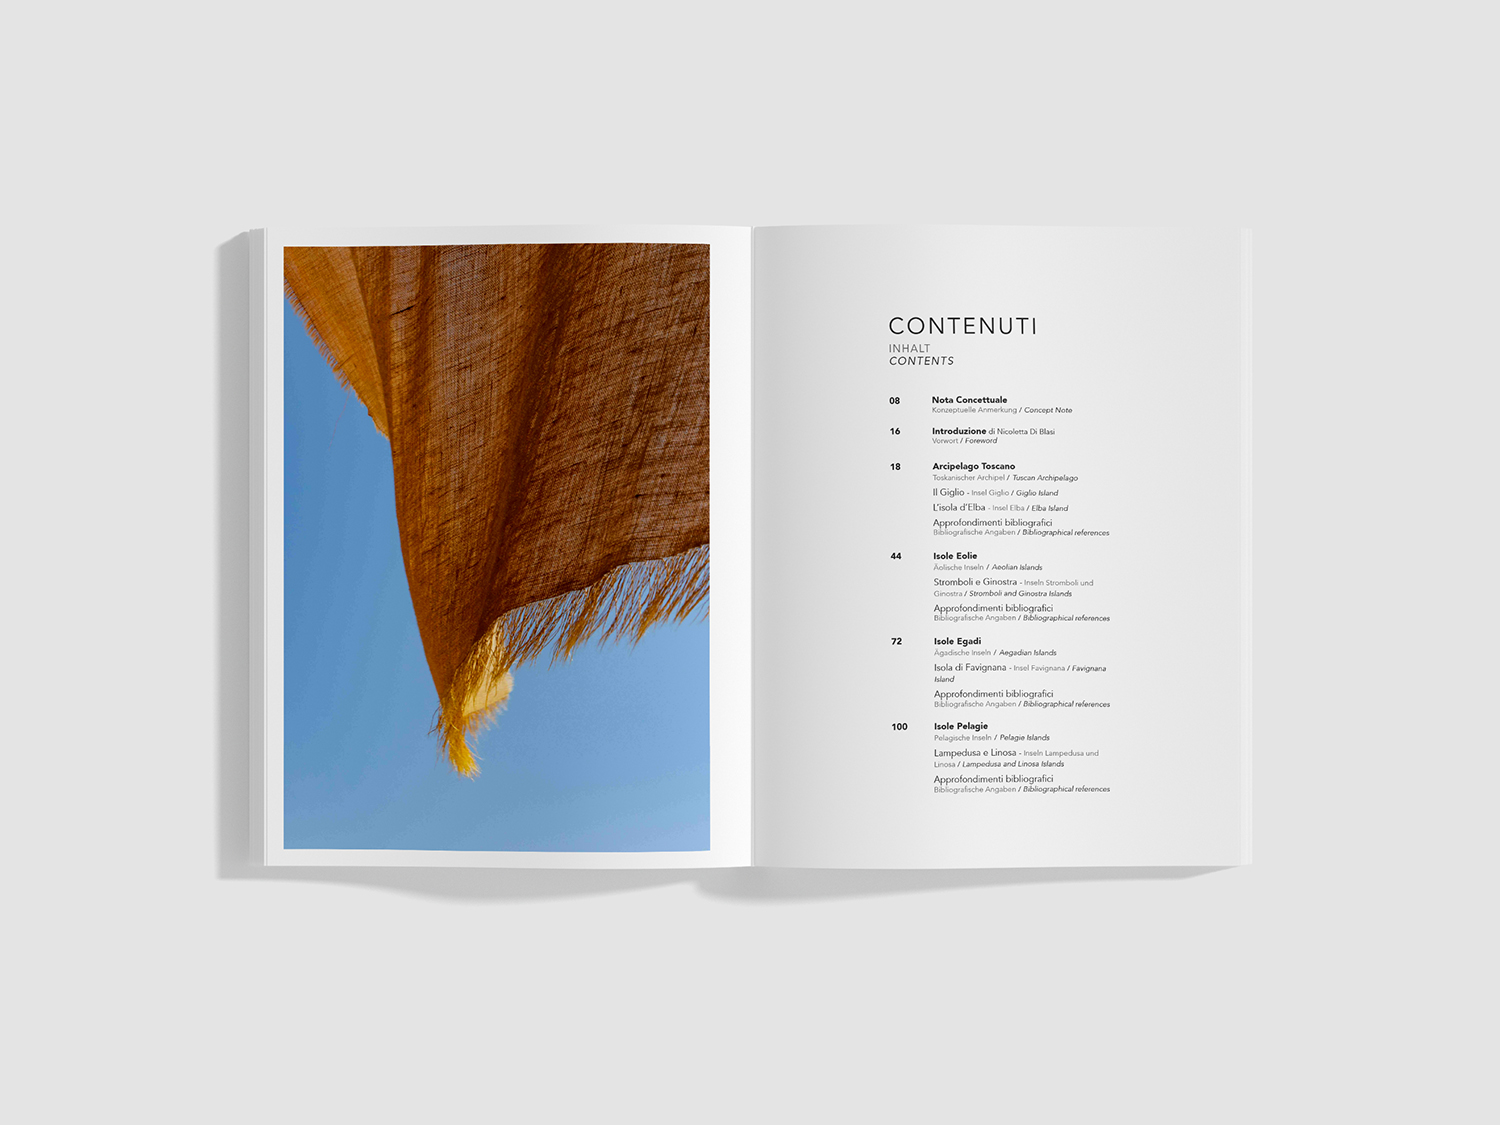 Archisearch ARCHIPELAGO: a photographic journey into the Mediterranean, the architecture of its islands and their identities by Corinna Del Bianco